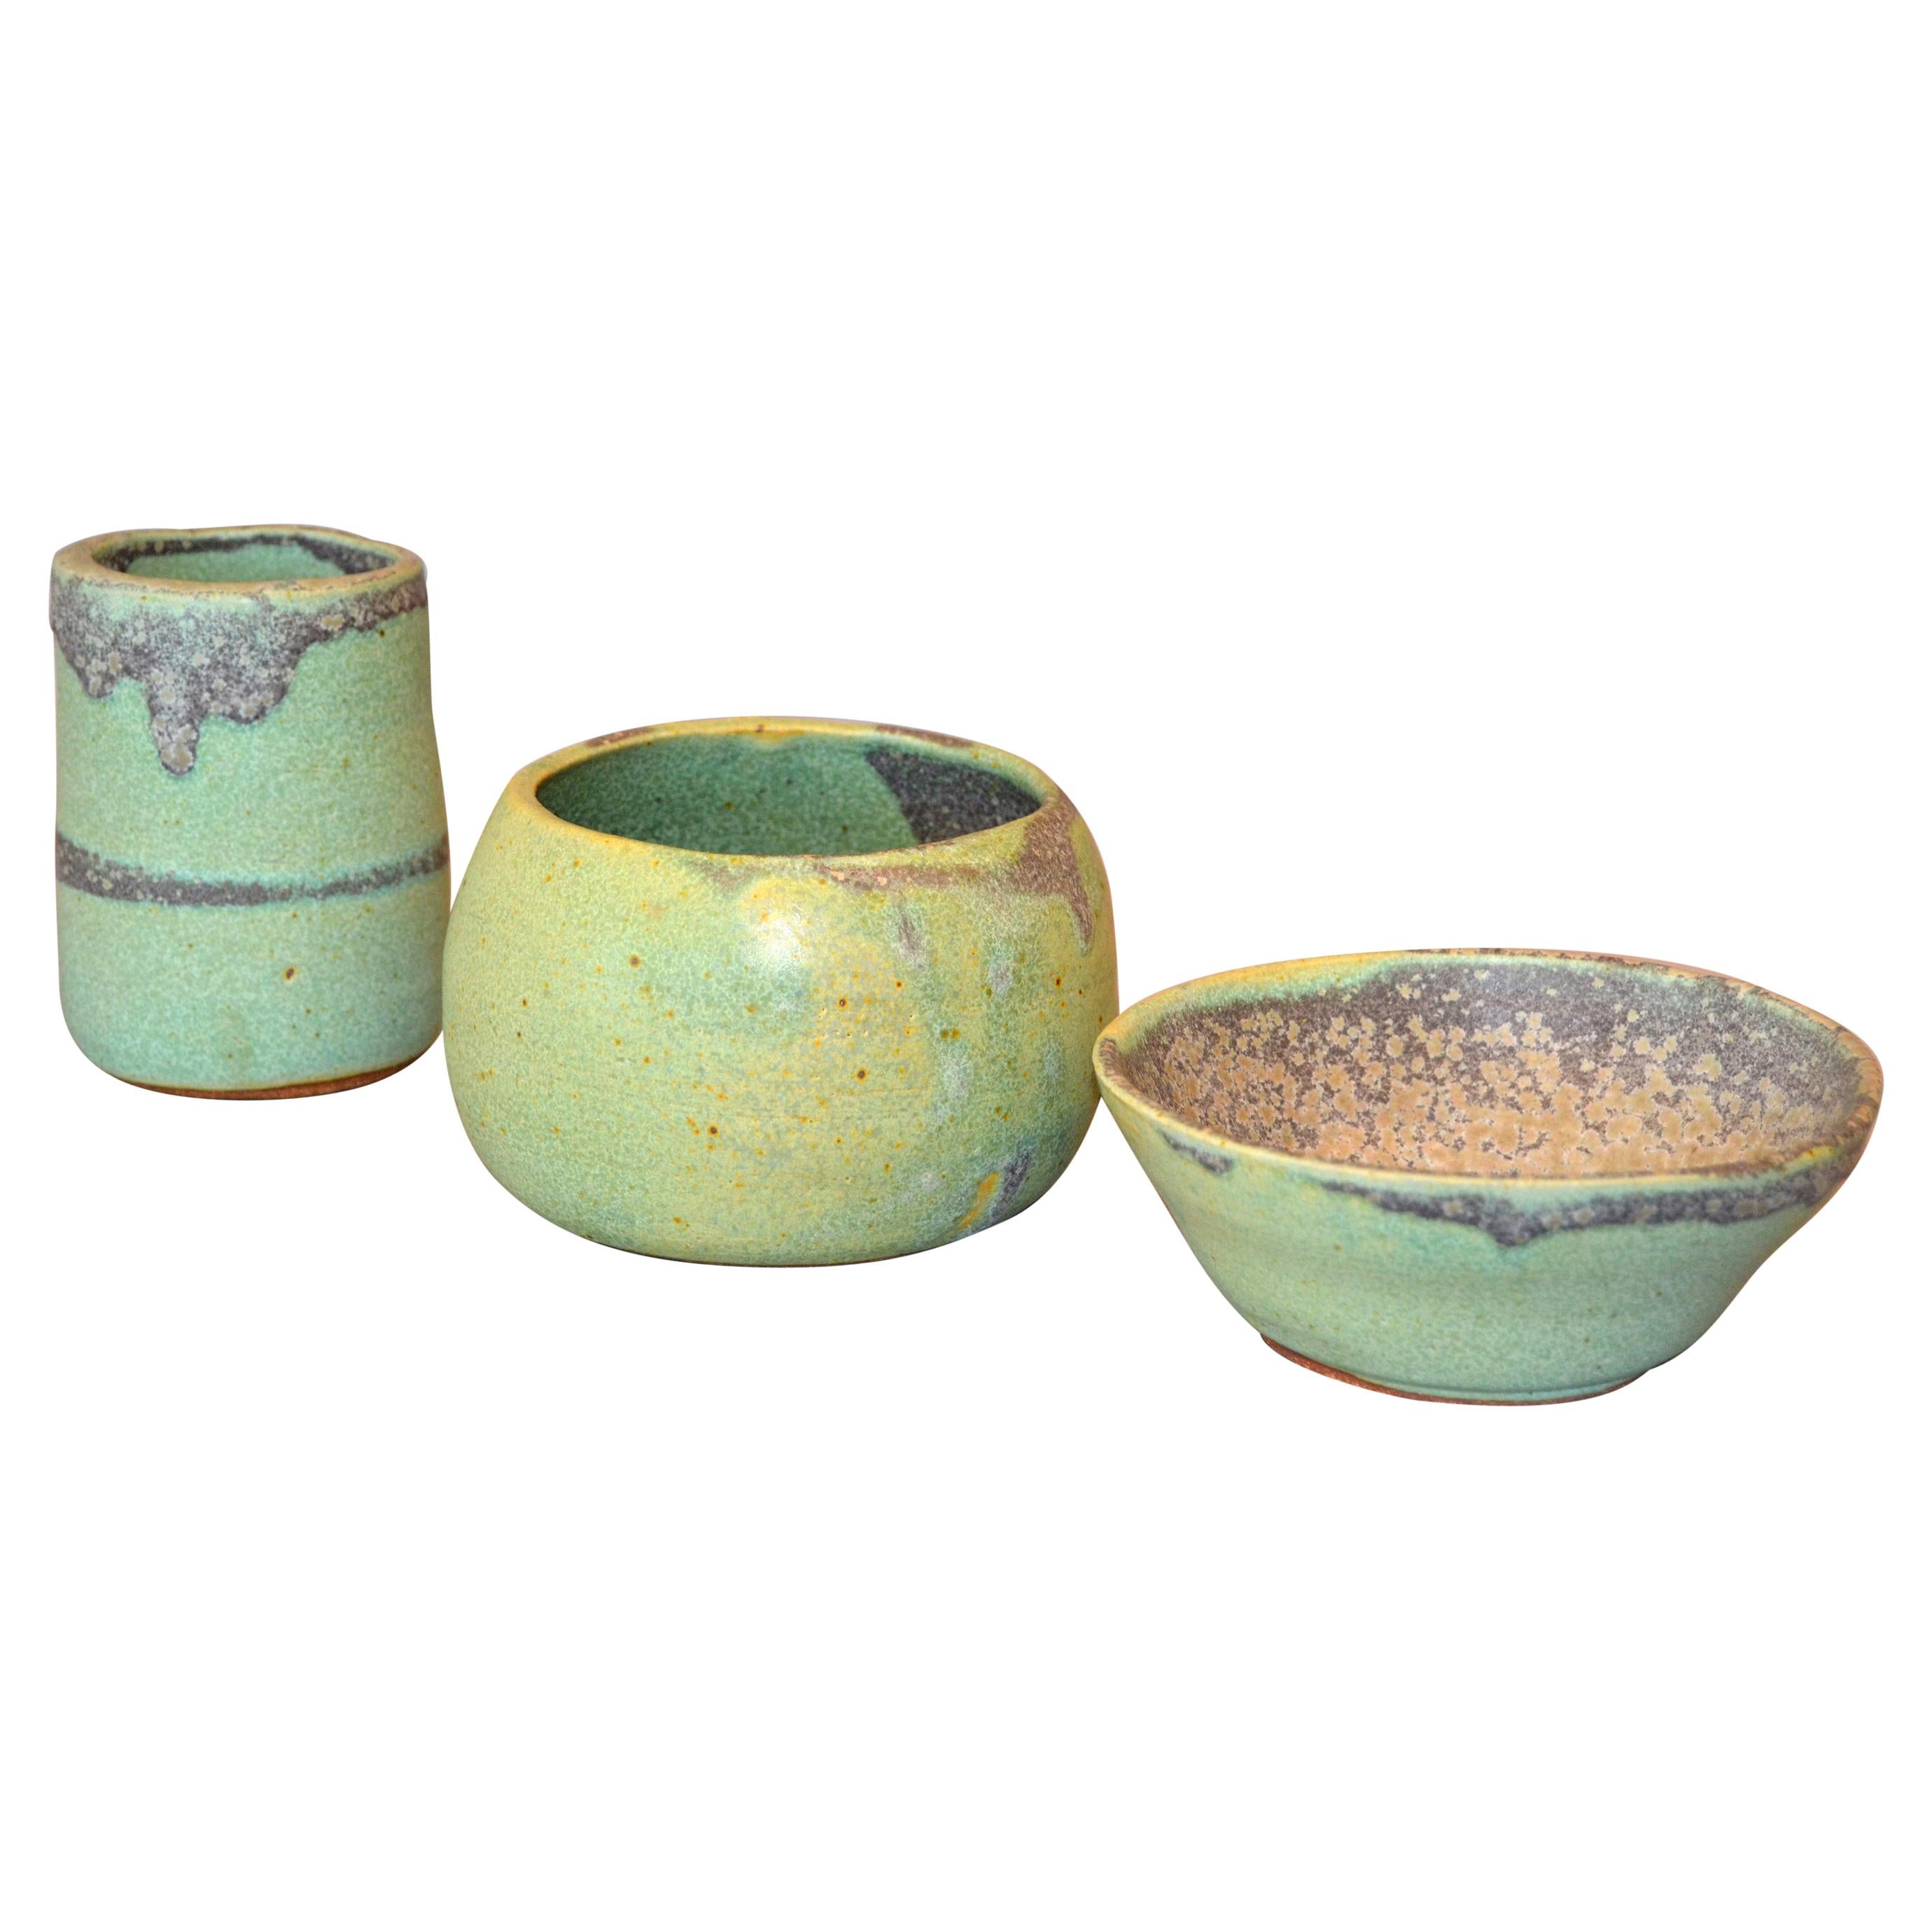 Vintage Handcrafted Aztec Green and Gray Pottery Bowls or Vessel Set of 3 For Sale